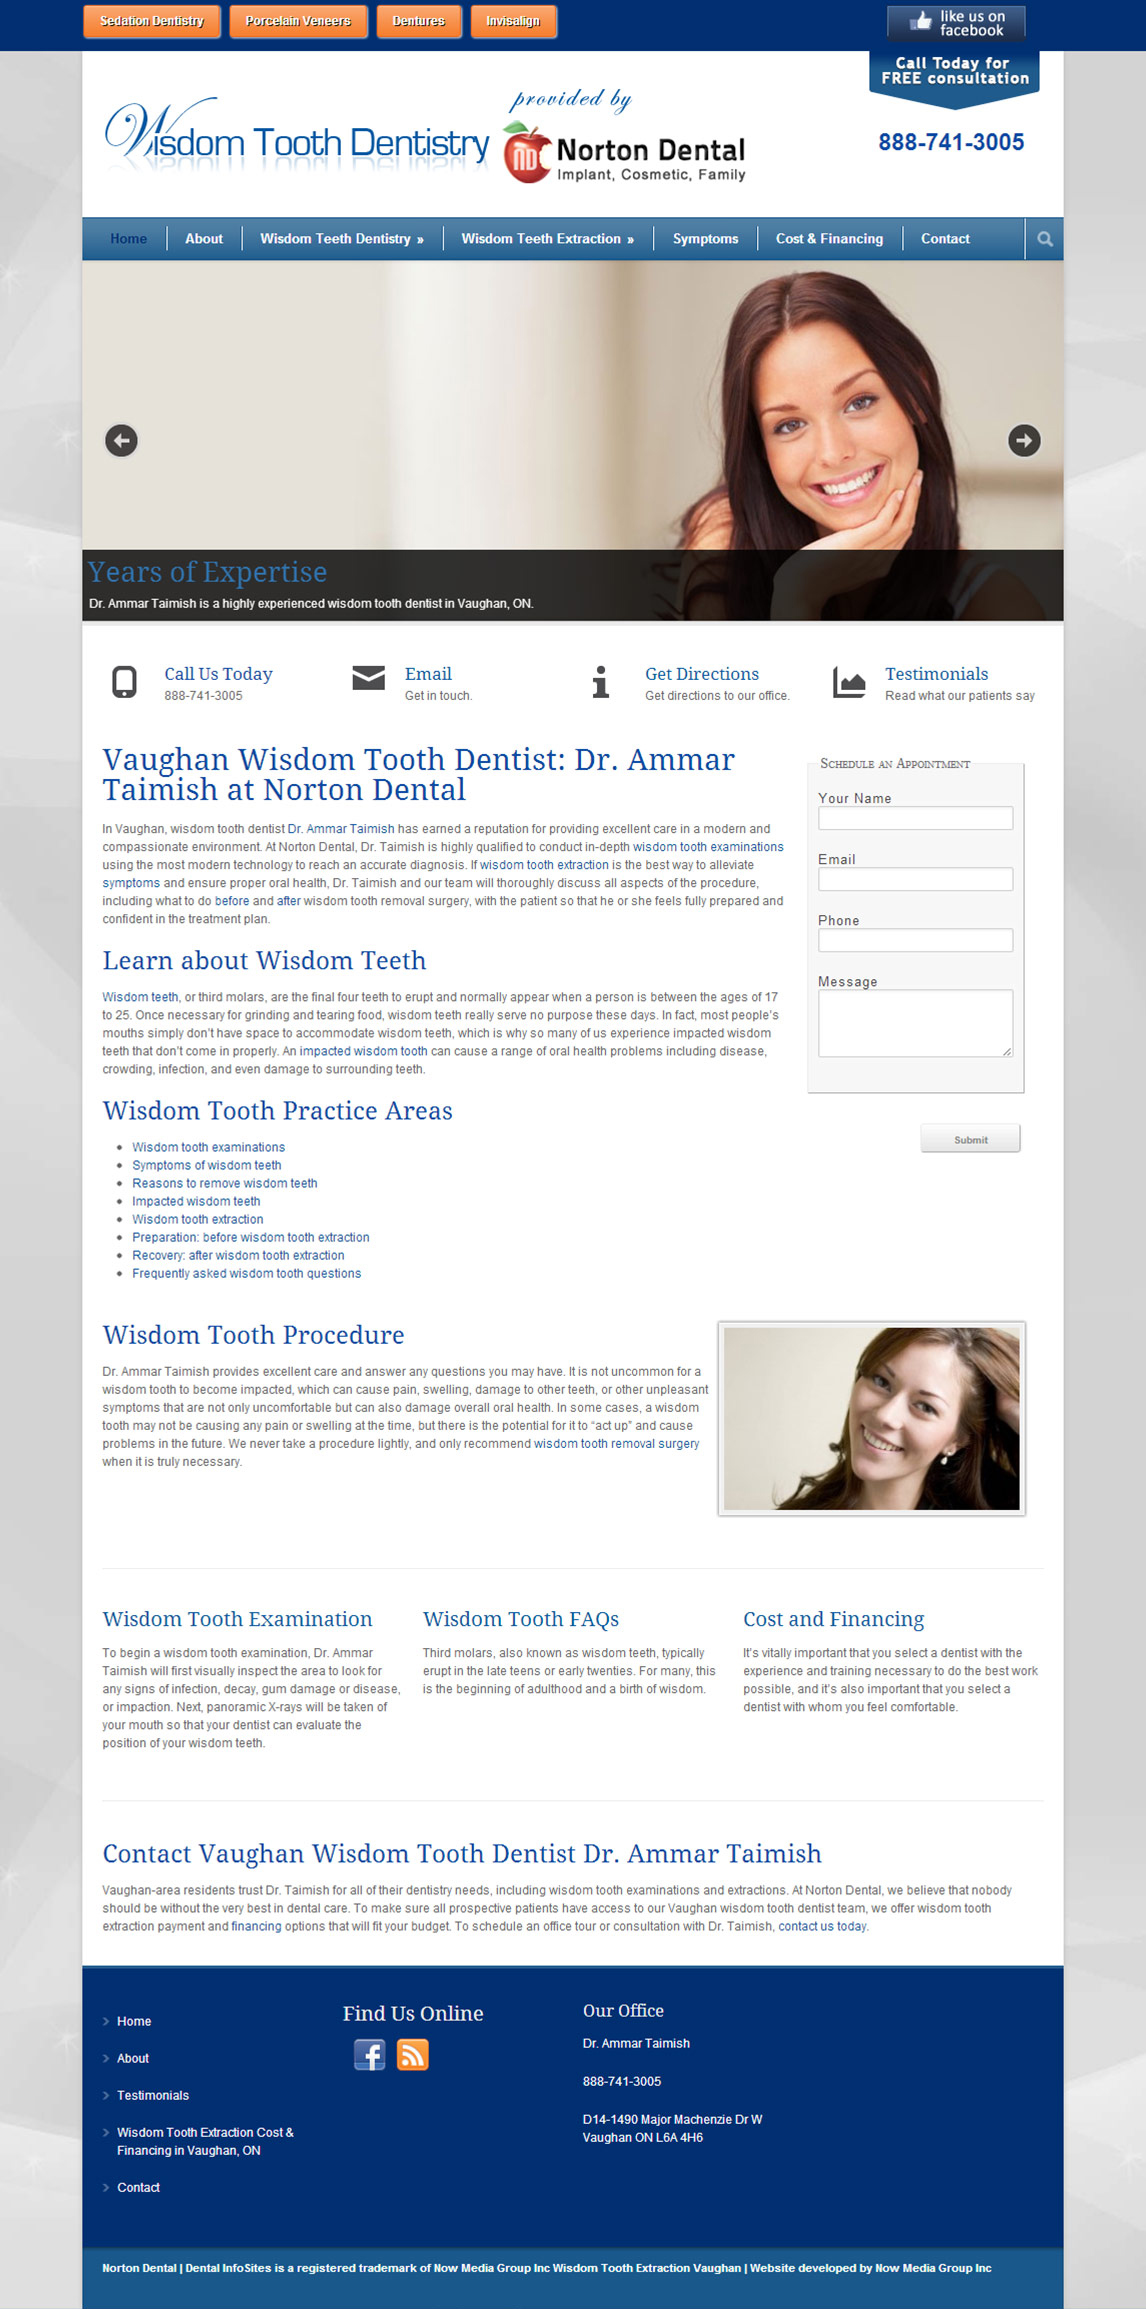 Wisdom Tooth Extraction InfoSite by Now Media Group